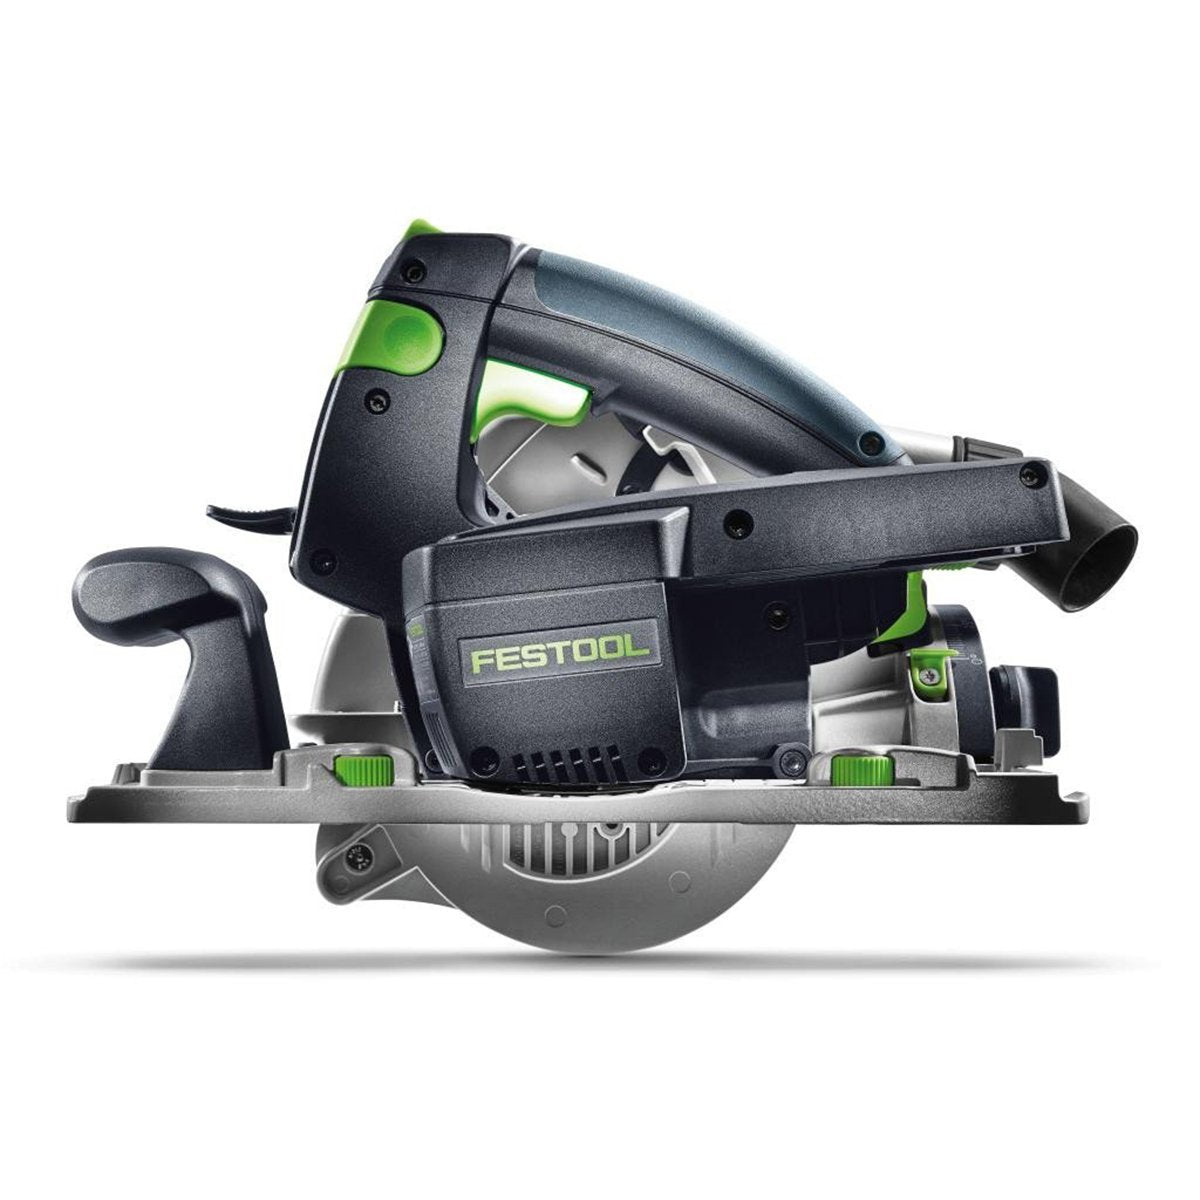 Festool's HKC 55 EBI-F-Set-FSK250 Carpentry Track Saw can be powered by a 15 or 18 volt battery and has ergonomic grips.